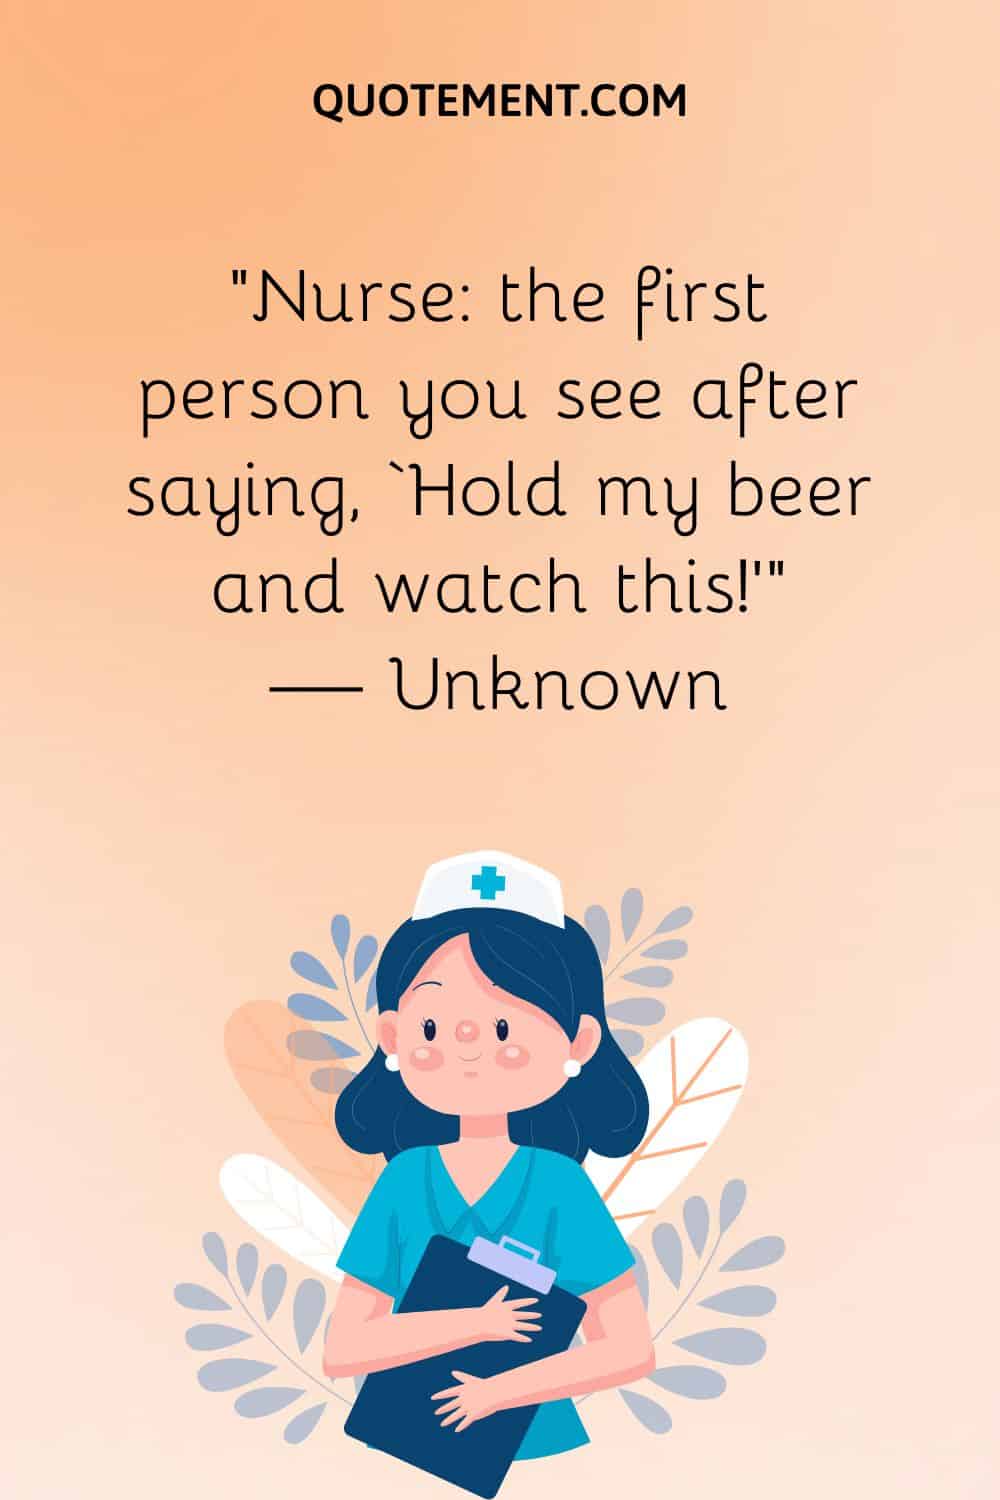 “Nurse the first person you see after saying, ‘Hold my beer and watch this!’” — Unknown